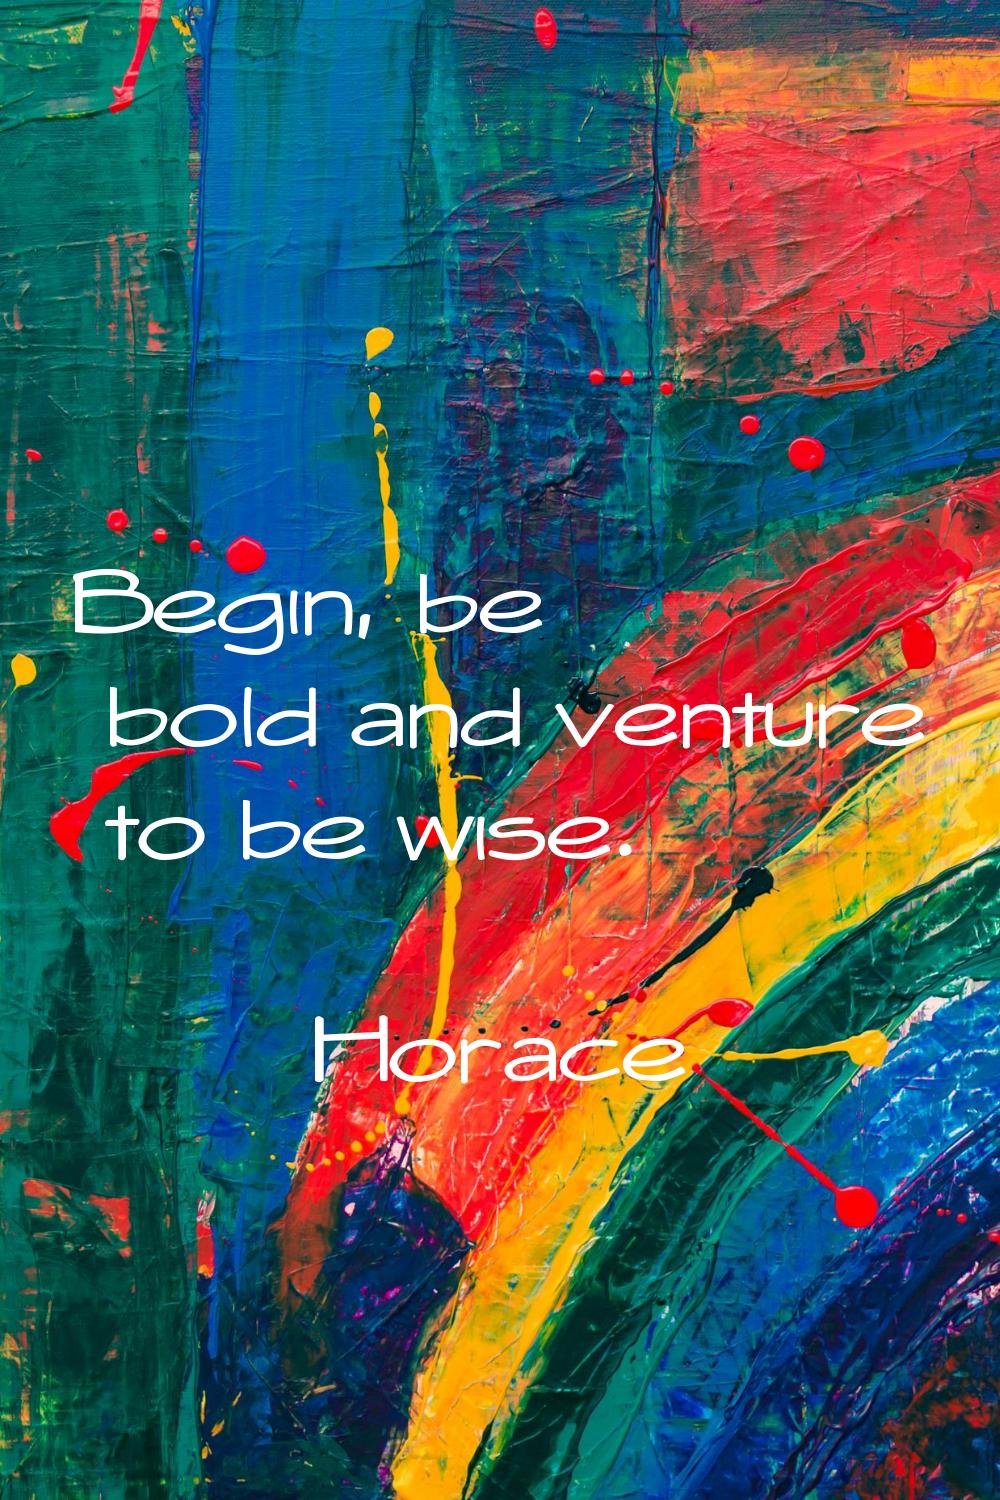 Begin, be bold and venture to be wise.